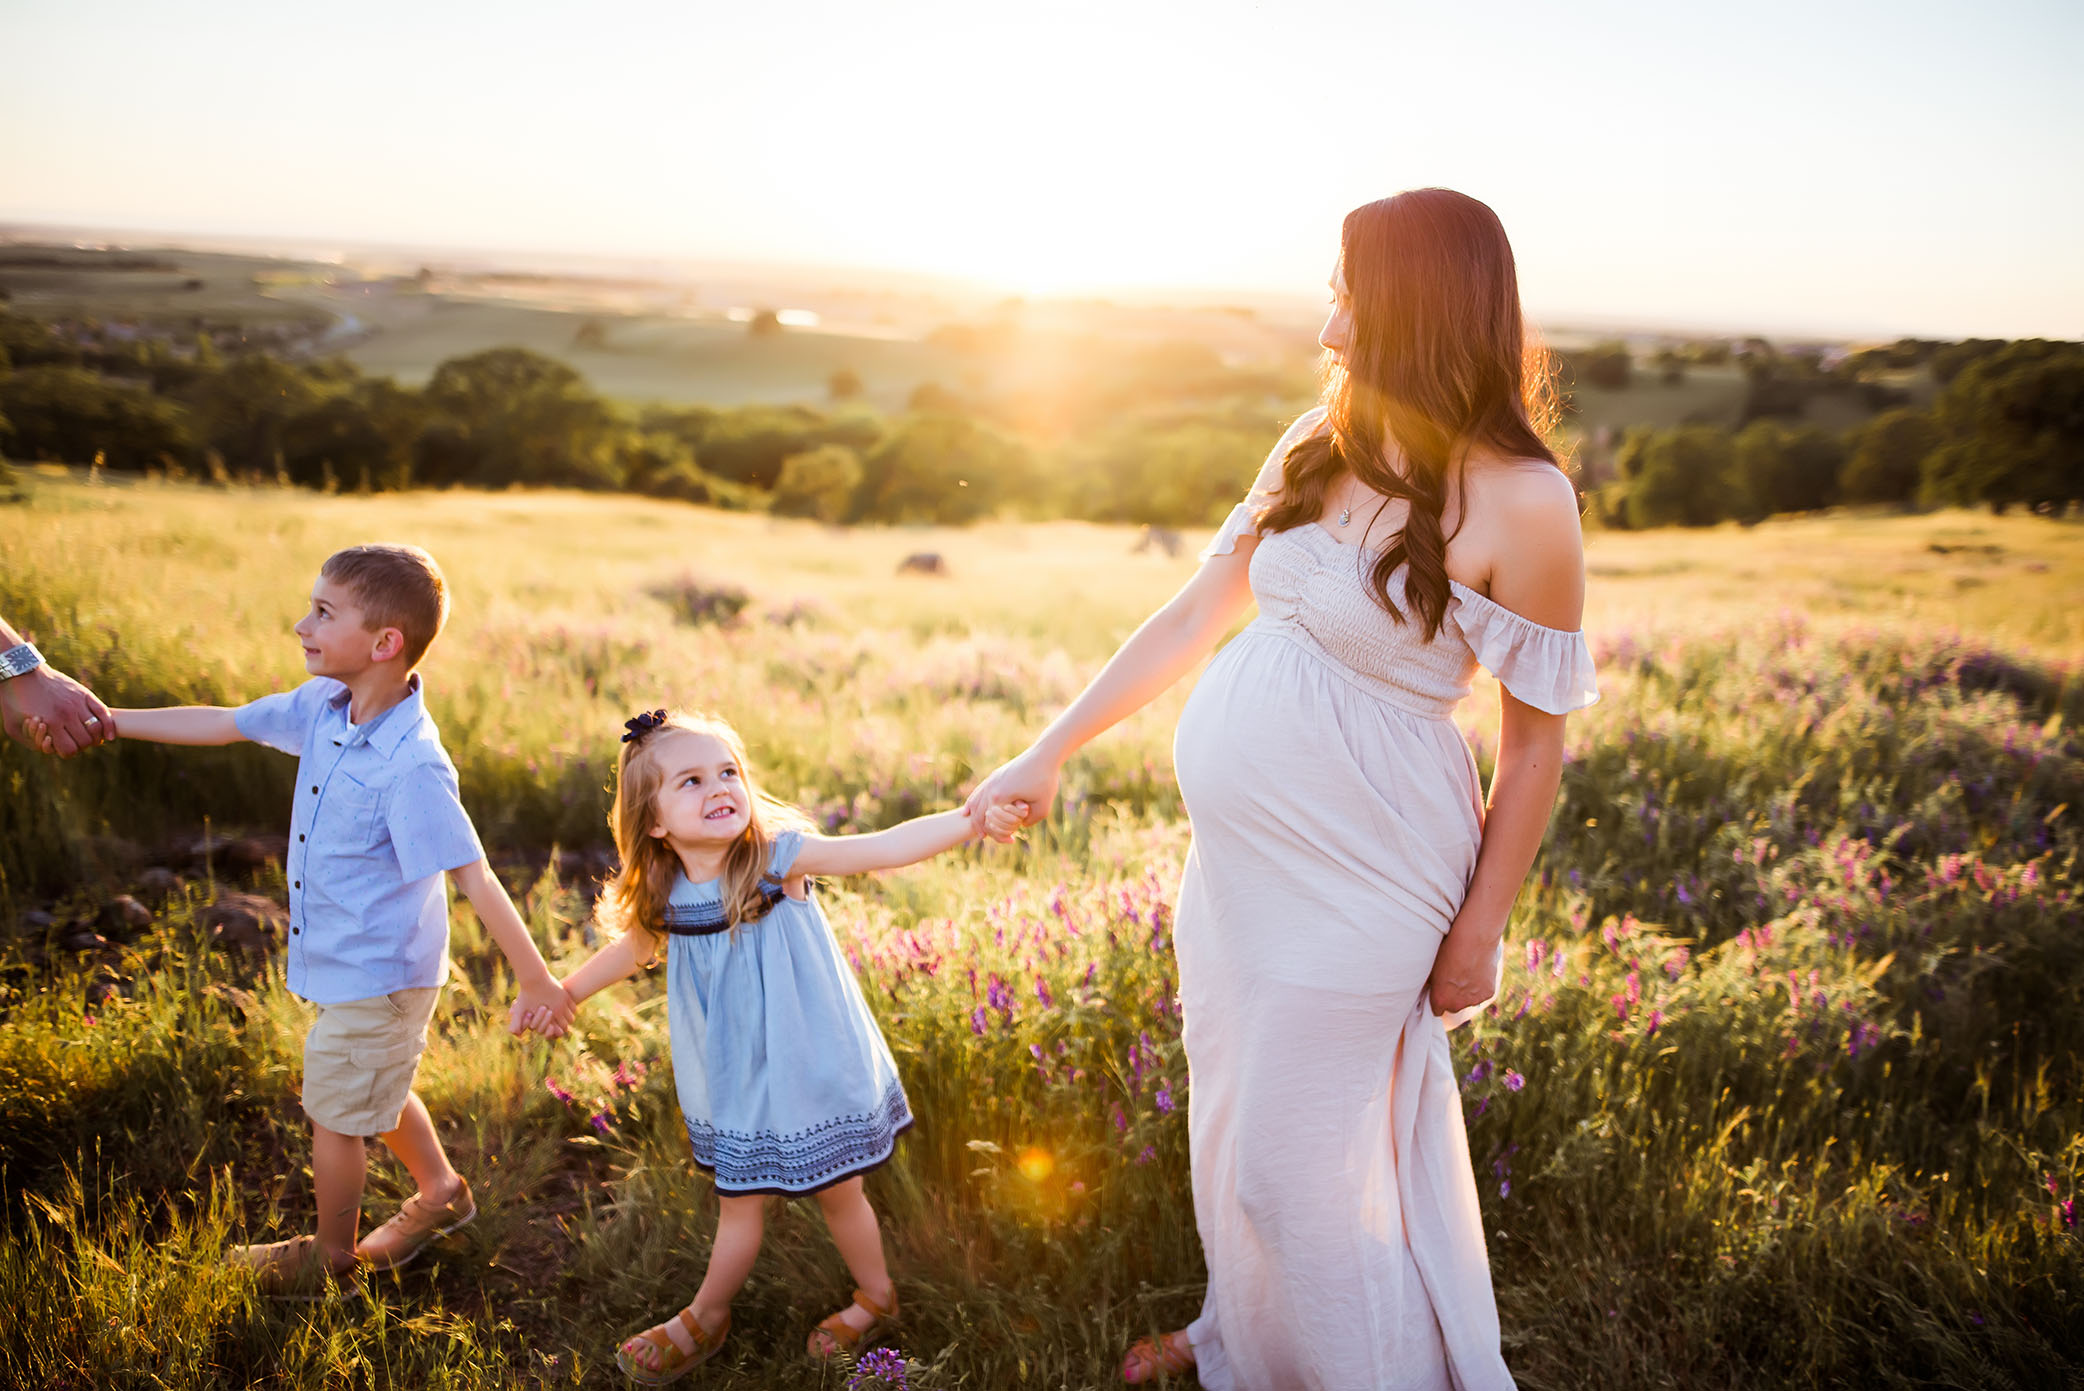 Kids help mom across a grassy hill captured by Sweet Beginnings Photography by Stephanie